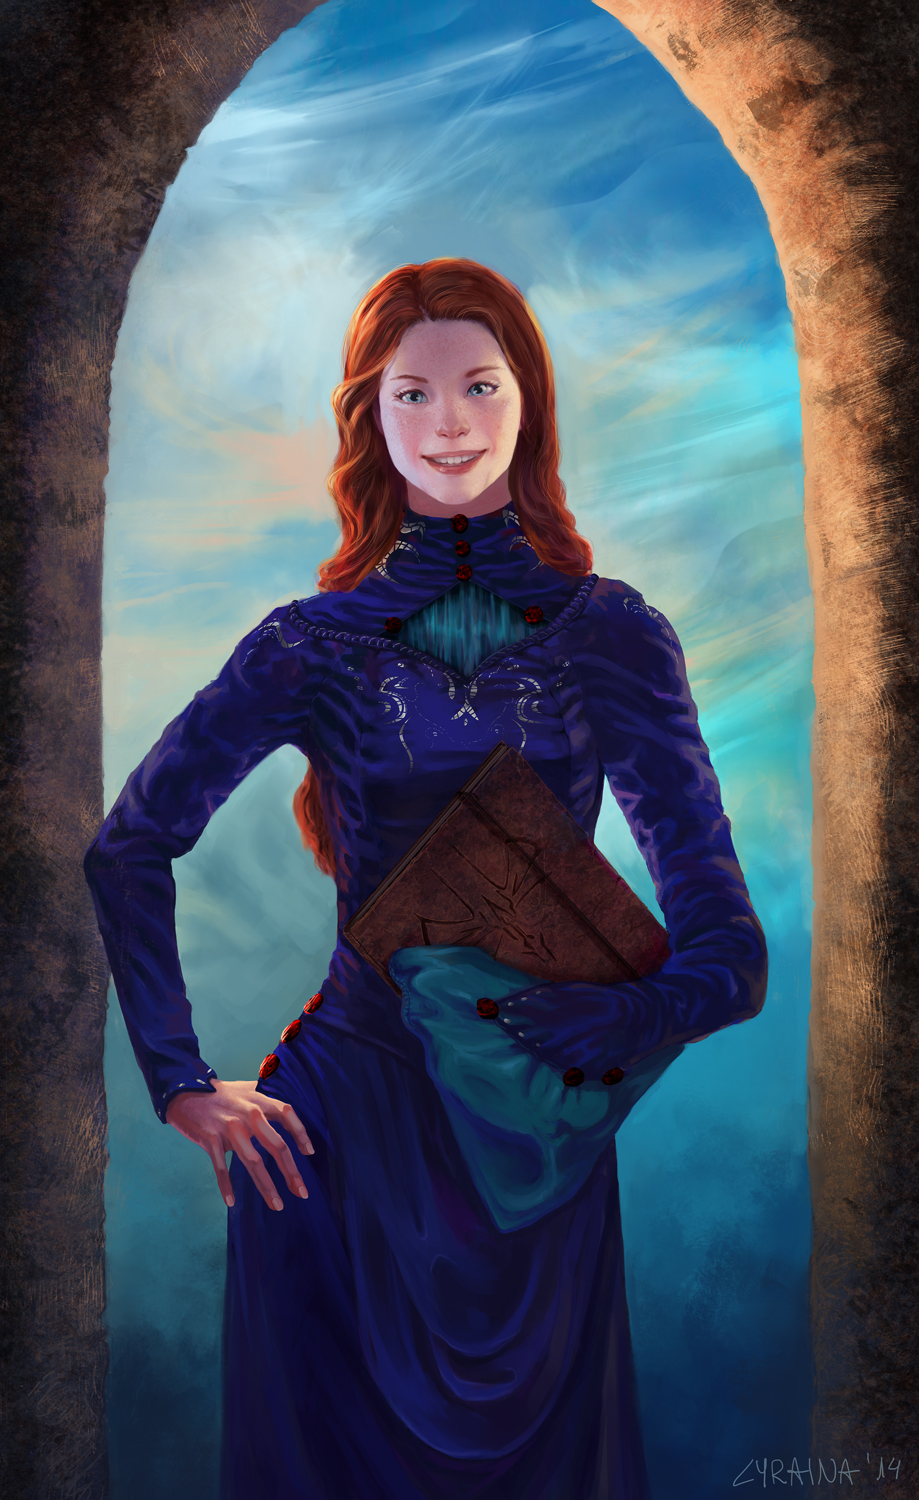 shallan__stormlight_archive_series__by_l